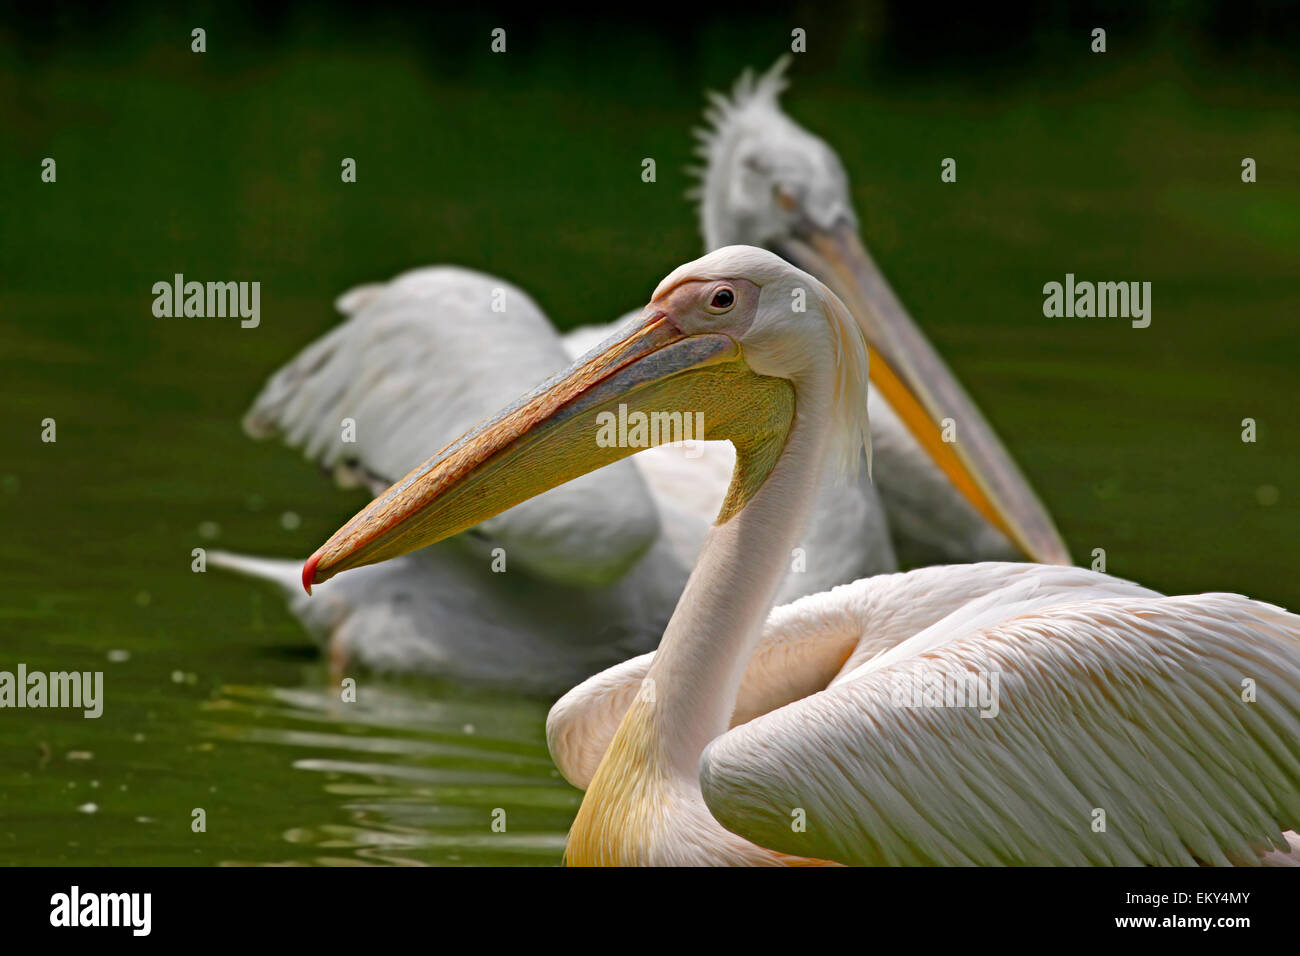 Great or Eastern White Pelican (Pelecanus onocrotalus) close up Stock Photo